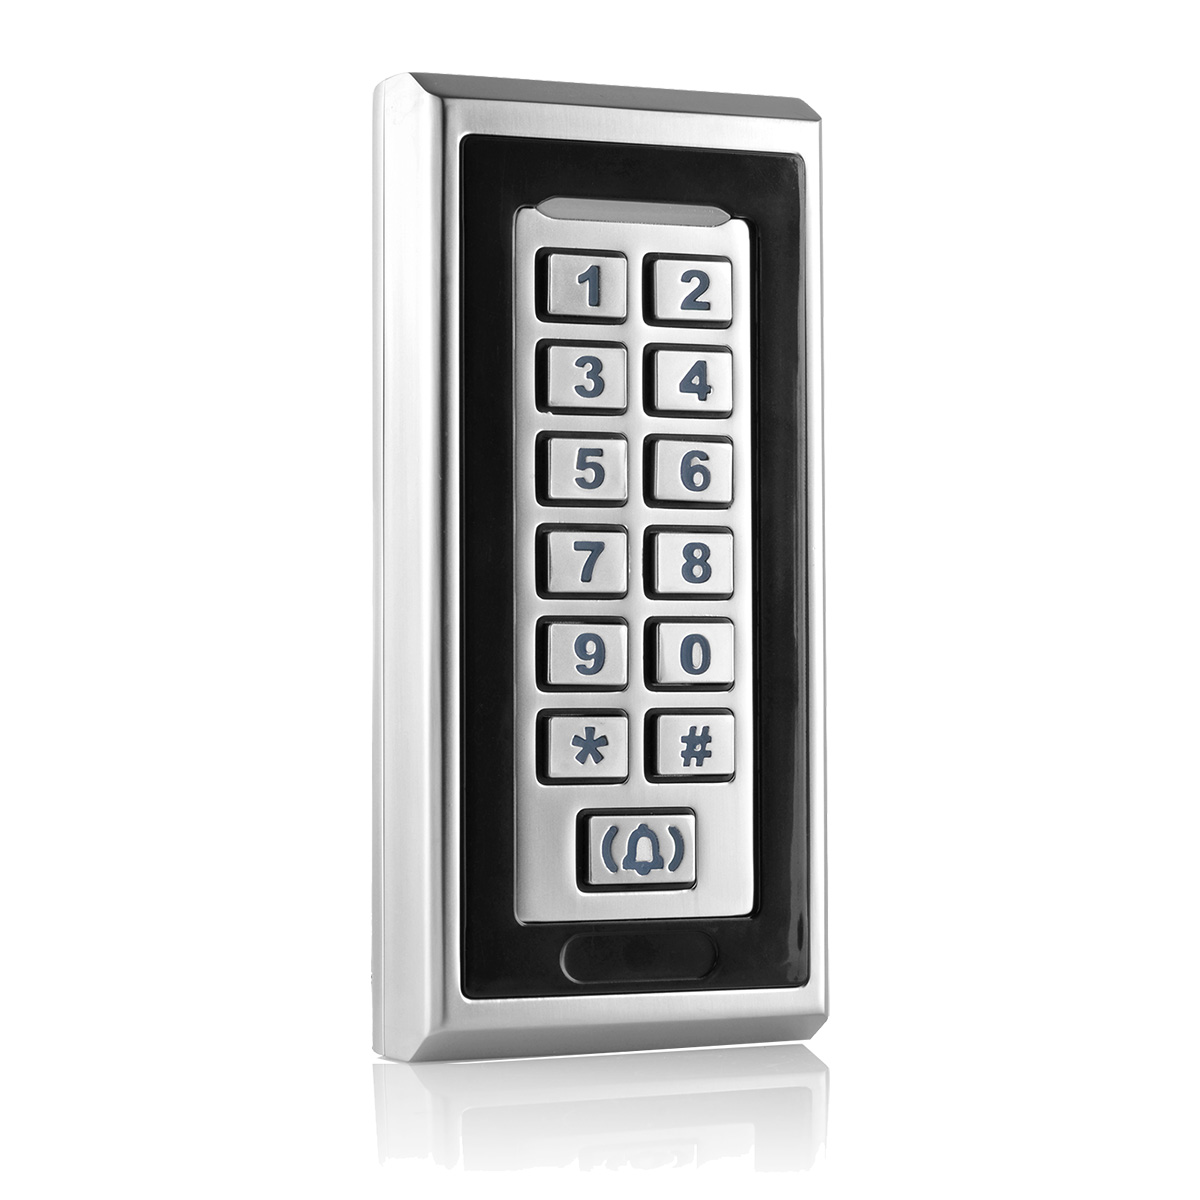 ZKTco-ZK-FP870E-Metal-Touch-Access-Controller-ID-Card-Password-Access-Control-System-Attendance-Mach-1504237-2